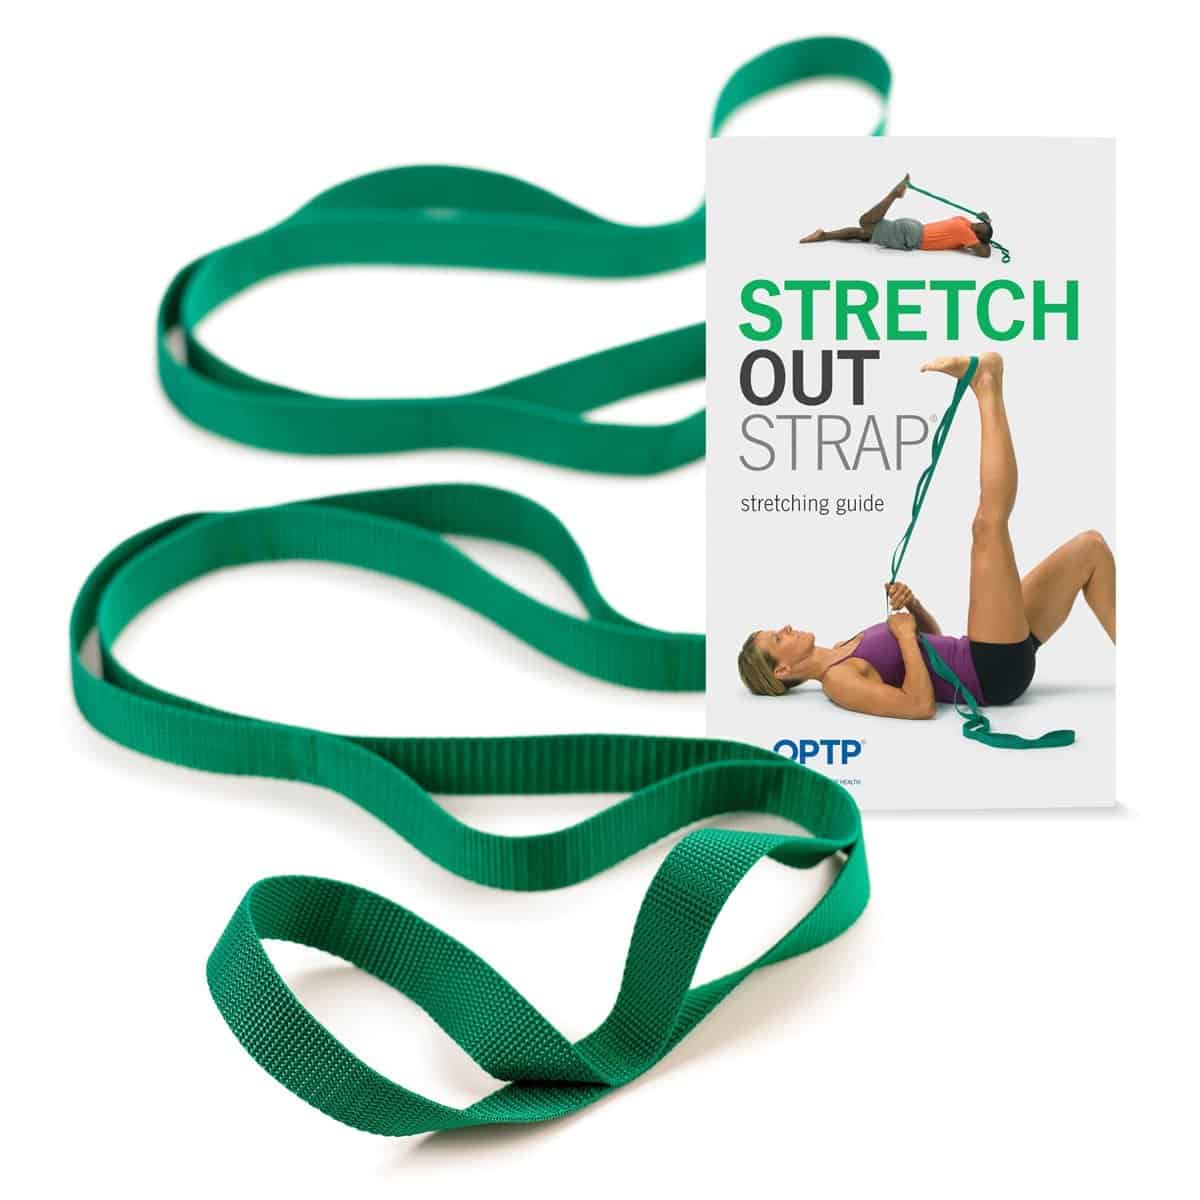 OPTP Stretch Out Strap Exercise Cerebral Palsy Yoga Pilates Workout Poster  GYM 40232158643